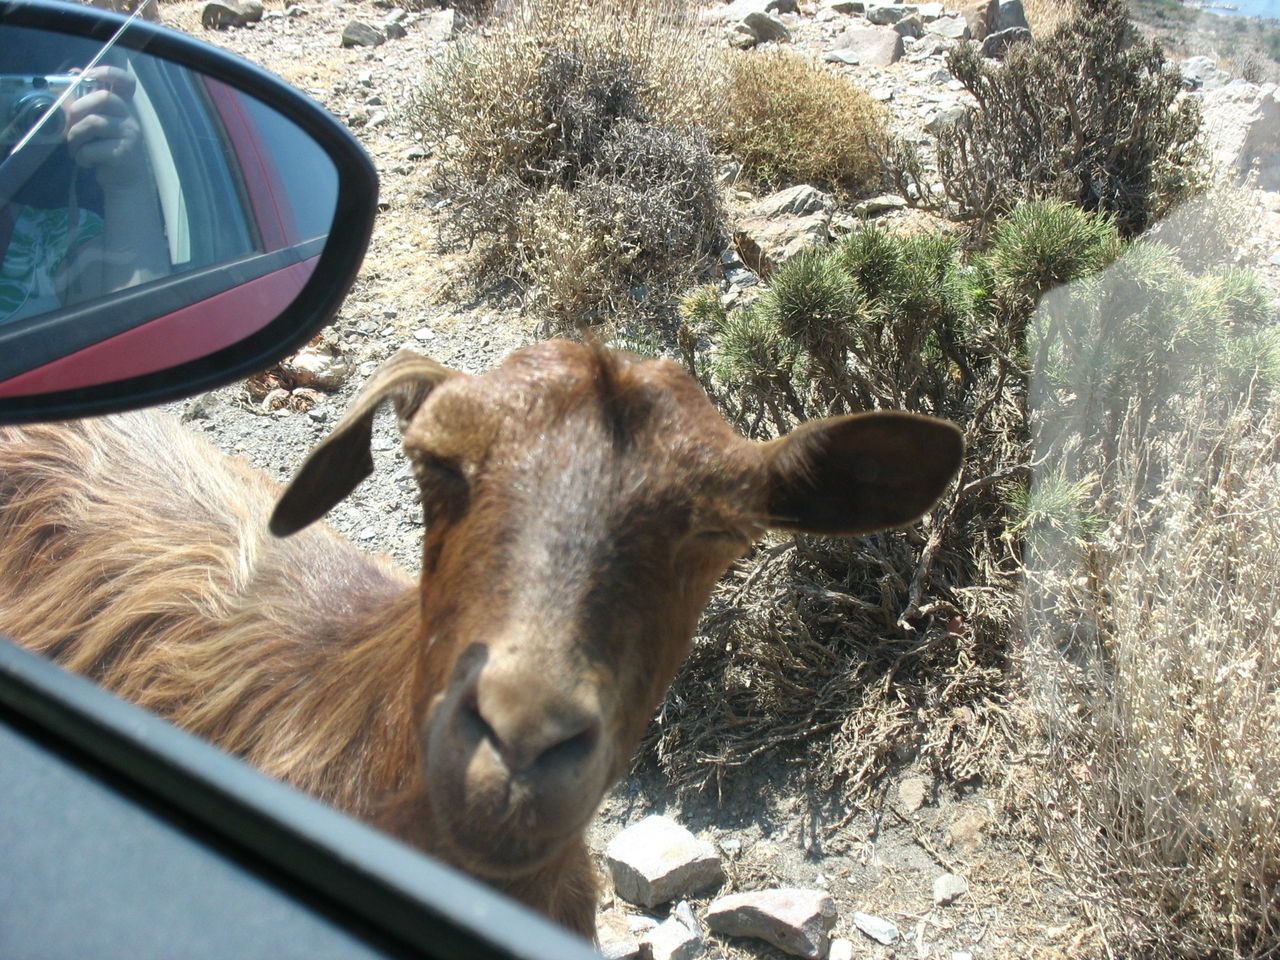 VIEW OF A HORSE IN THE CAR